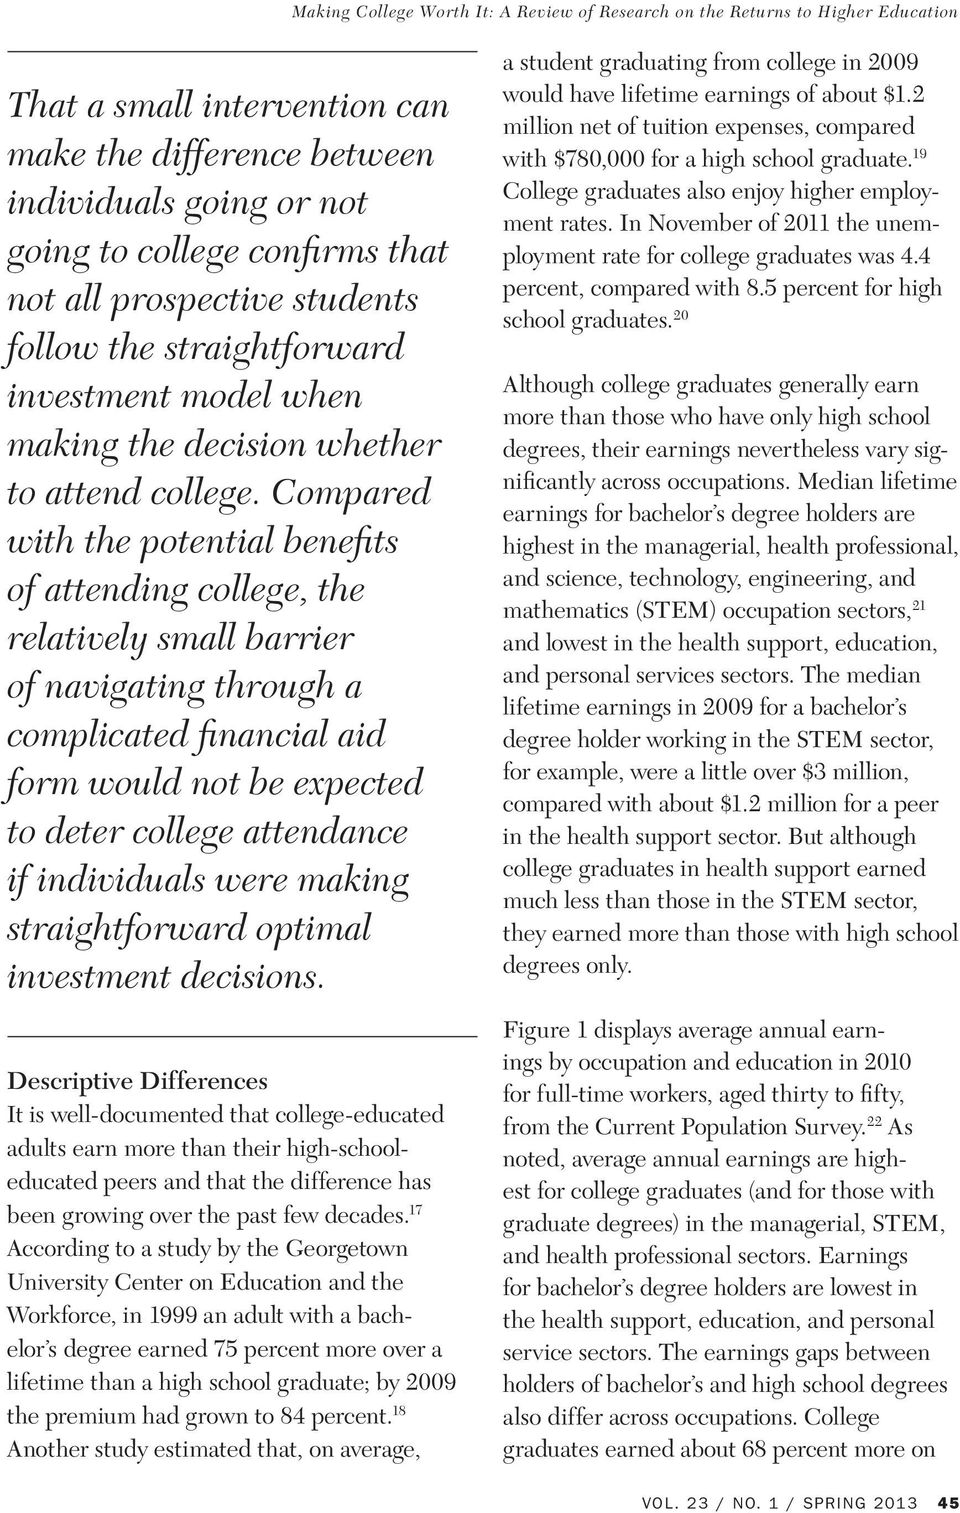 Compared with the potential benefits of attending college, the relatively small barrier of navigating through a complicated financial aid form would not be expected to deter college attendance if